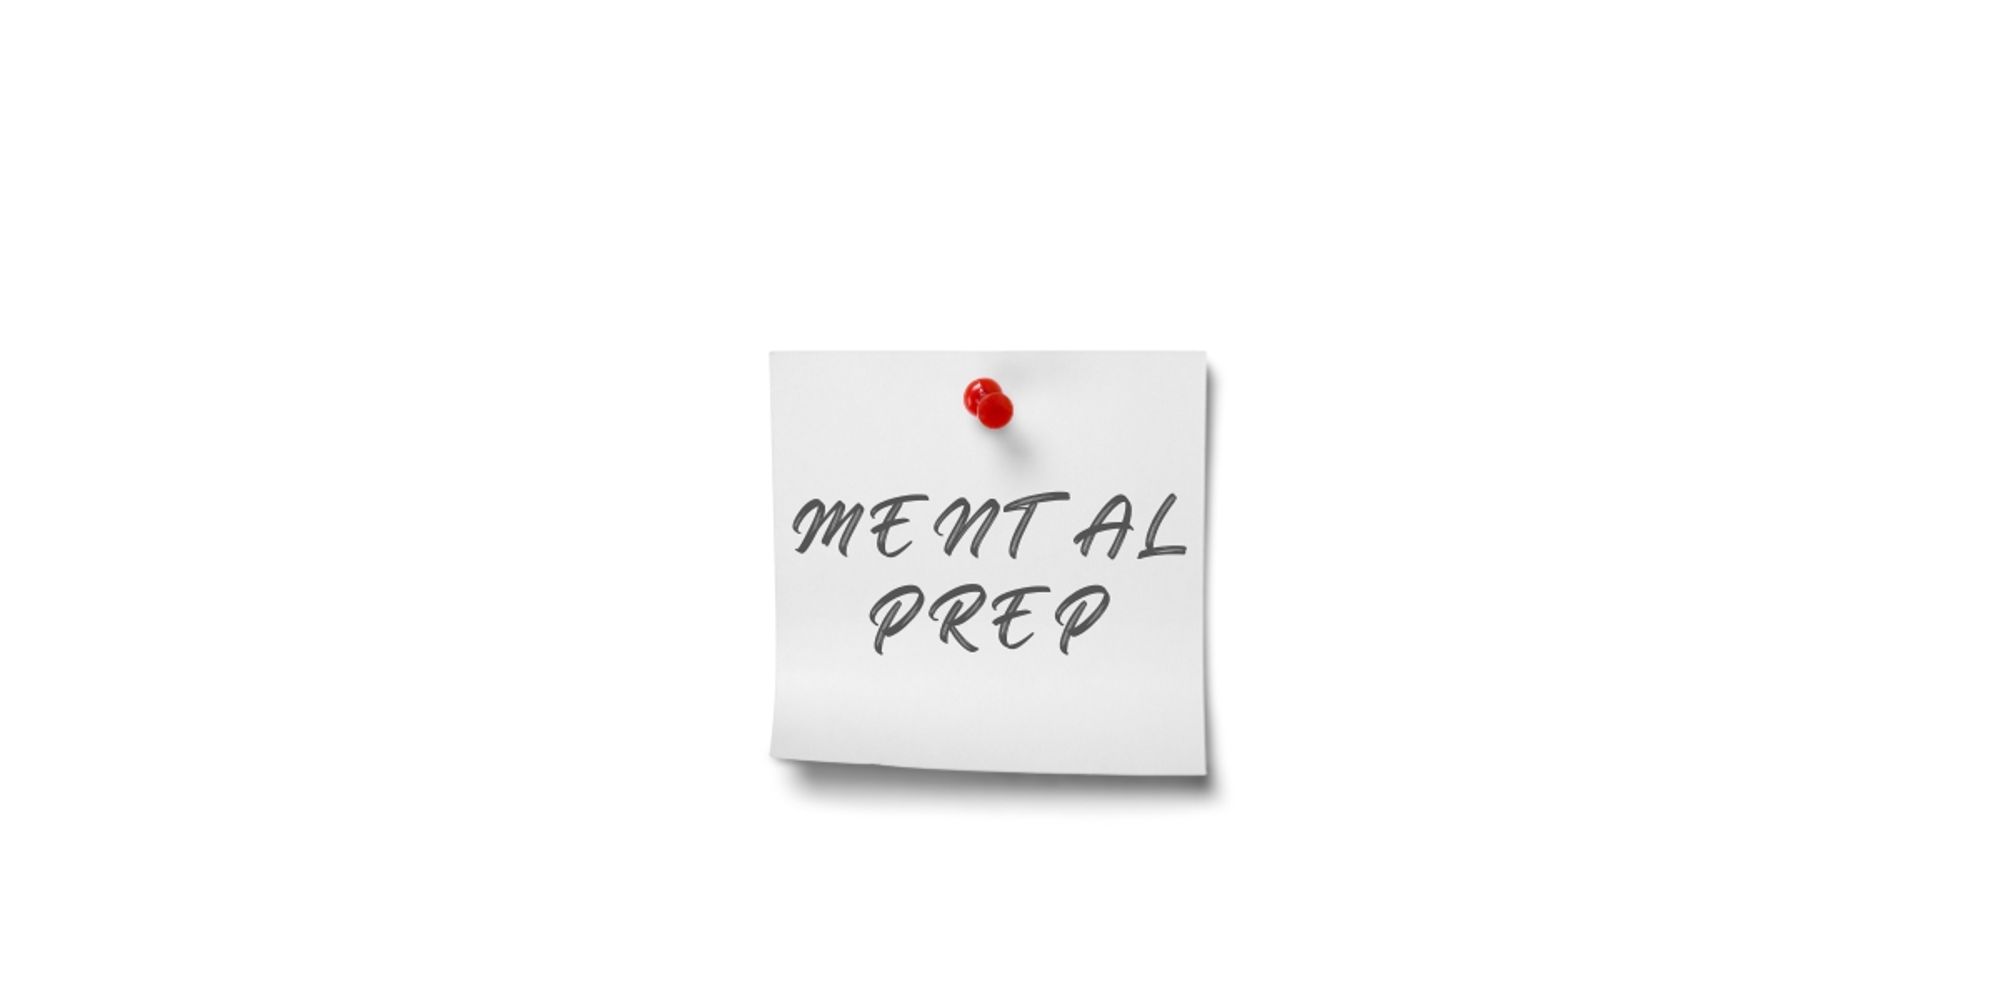 What is your top interview prep tip?